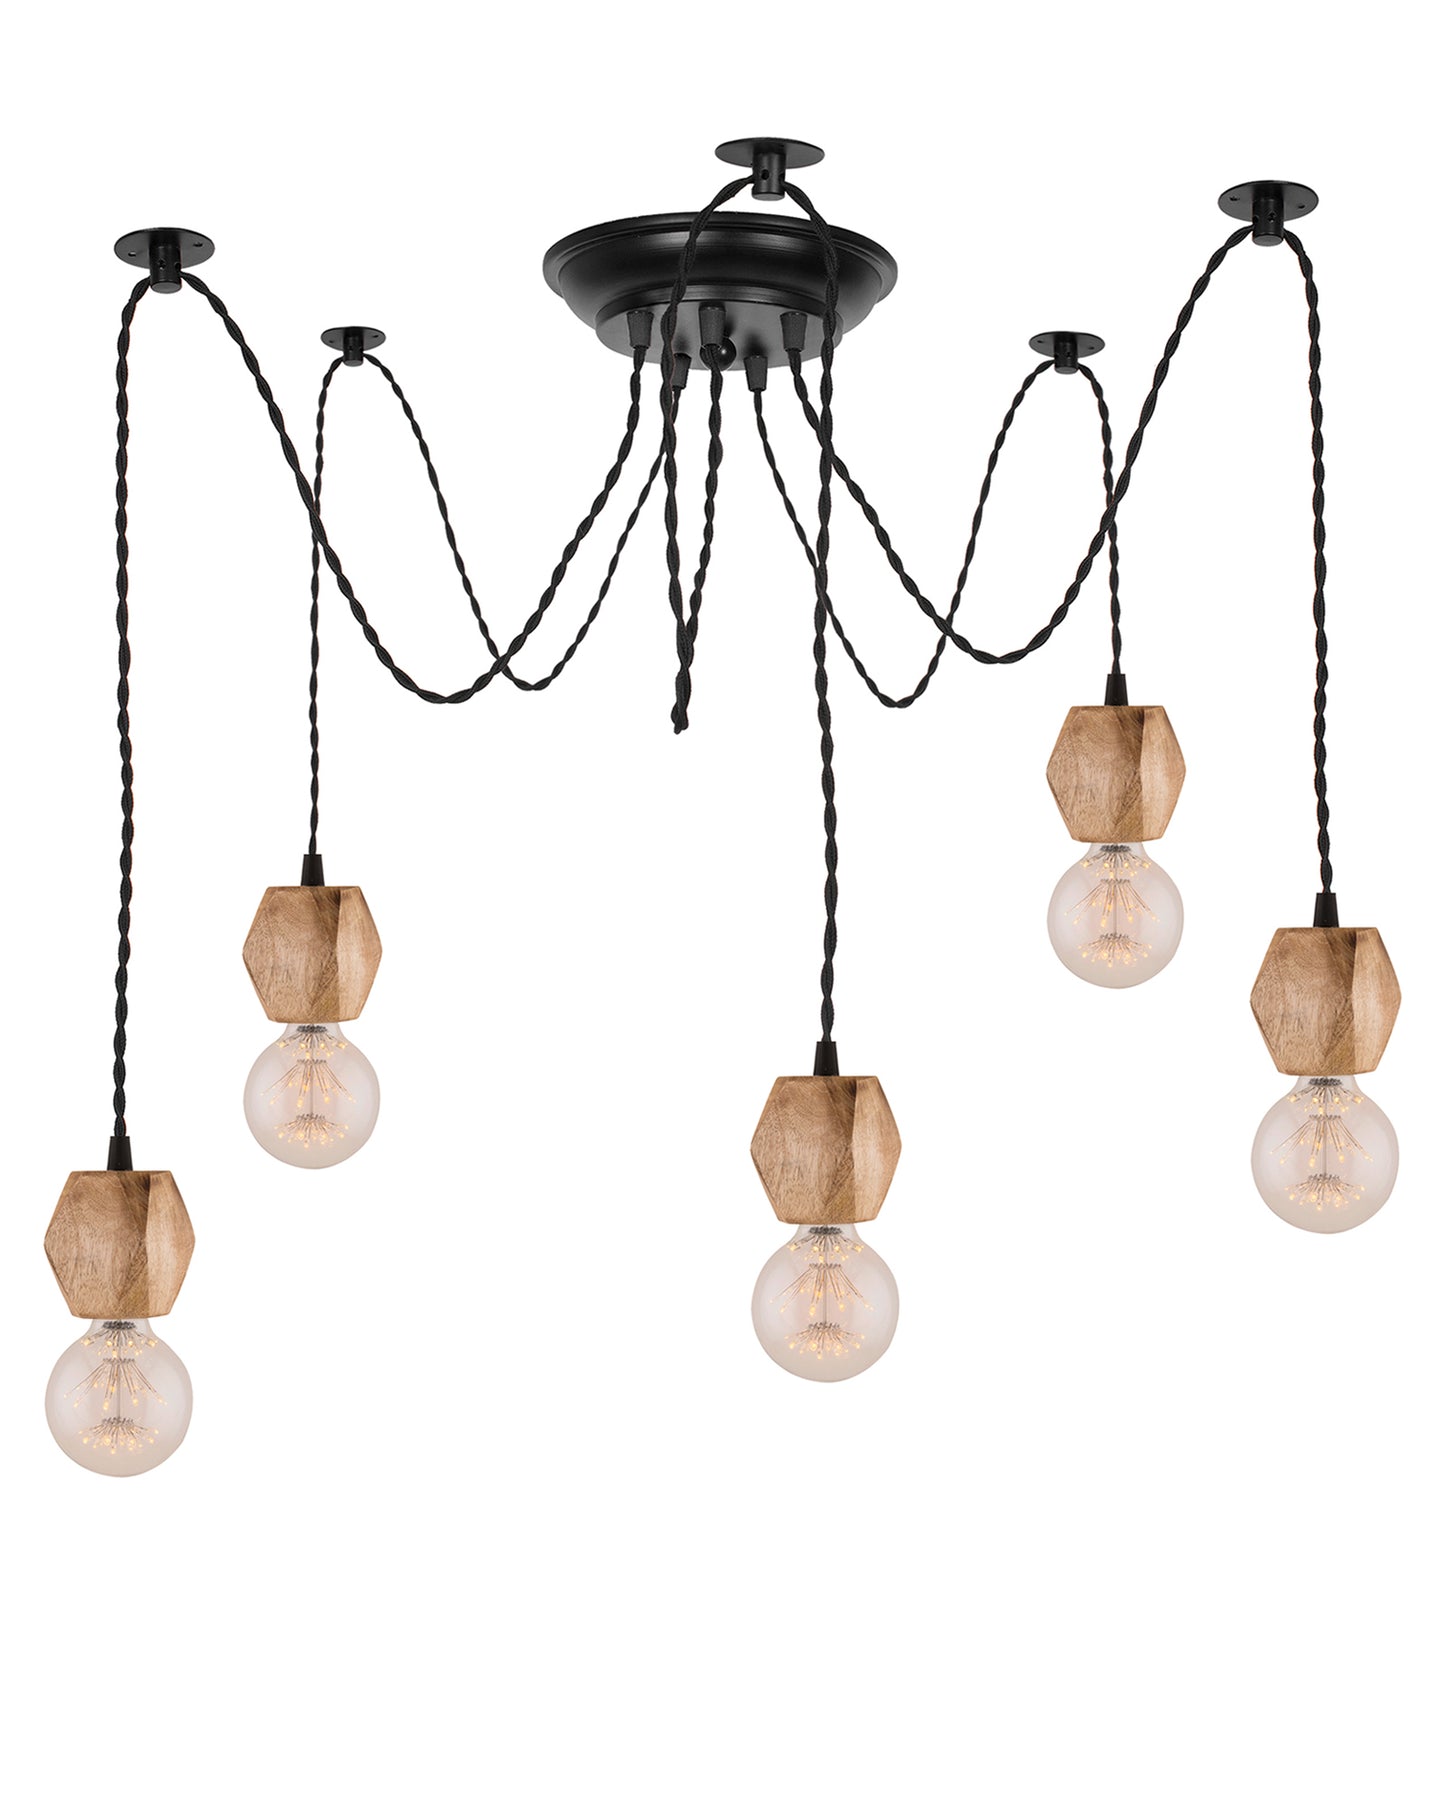 Arms Spider Chandelier Lamp, Natural Hexagon Holder, Vintage Edison Style E 27 Adjustable DIY Ceiling Pendant Light, E27 Rustic Cluster Hanging Light(1.25 M, Black Twisted Wire)